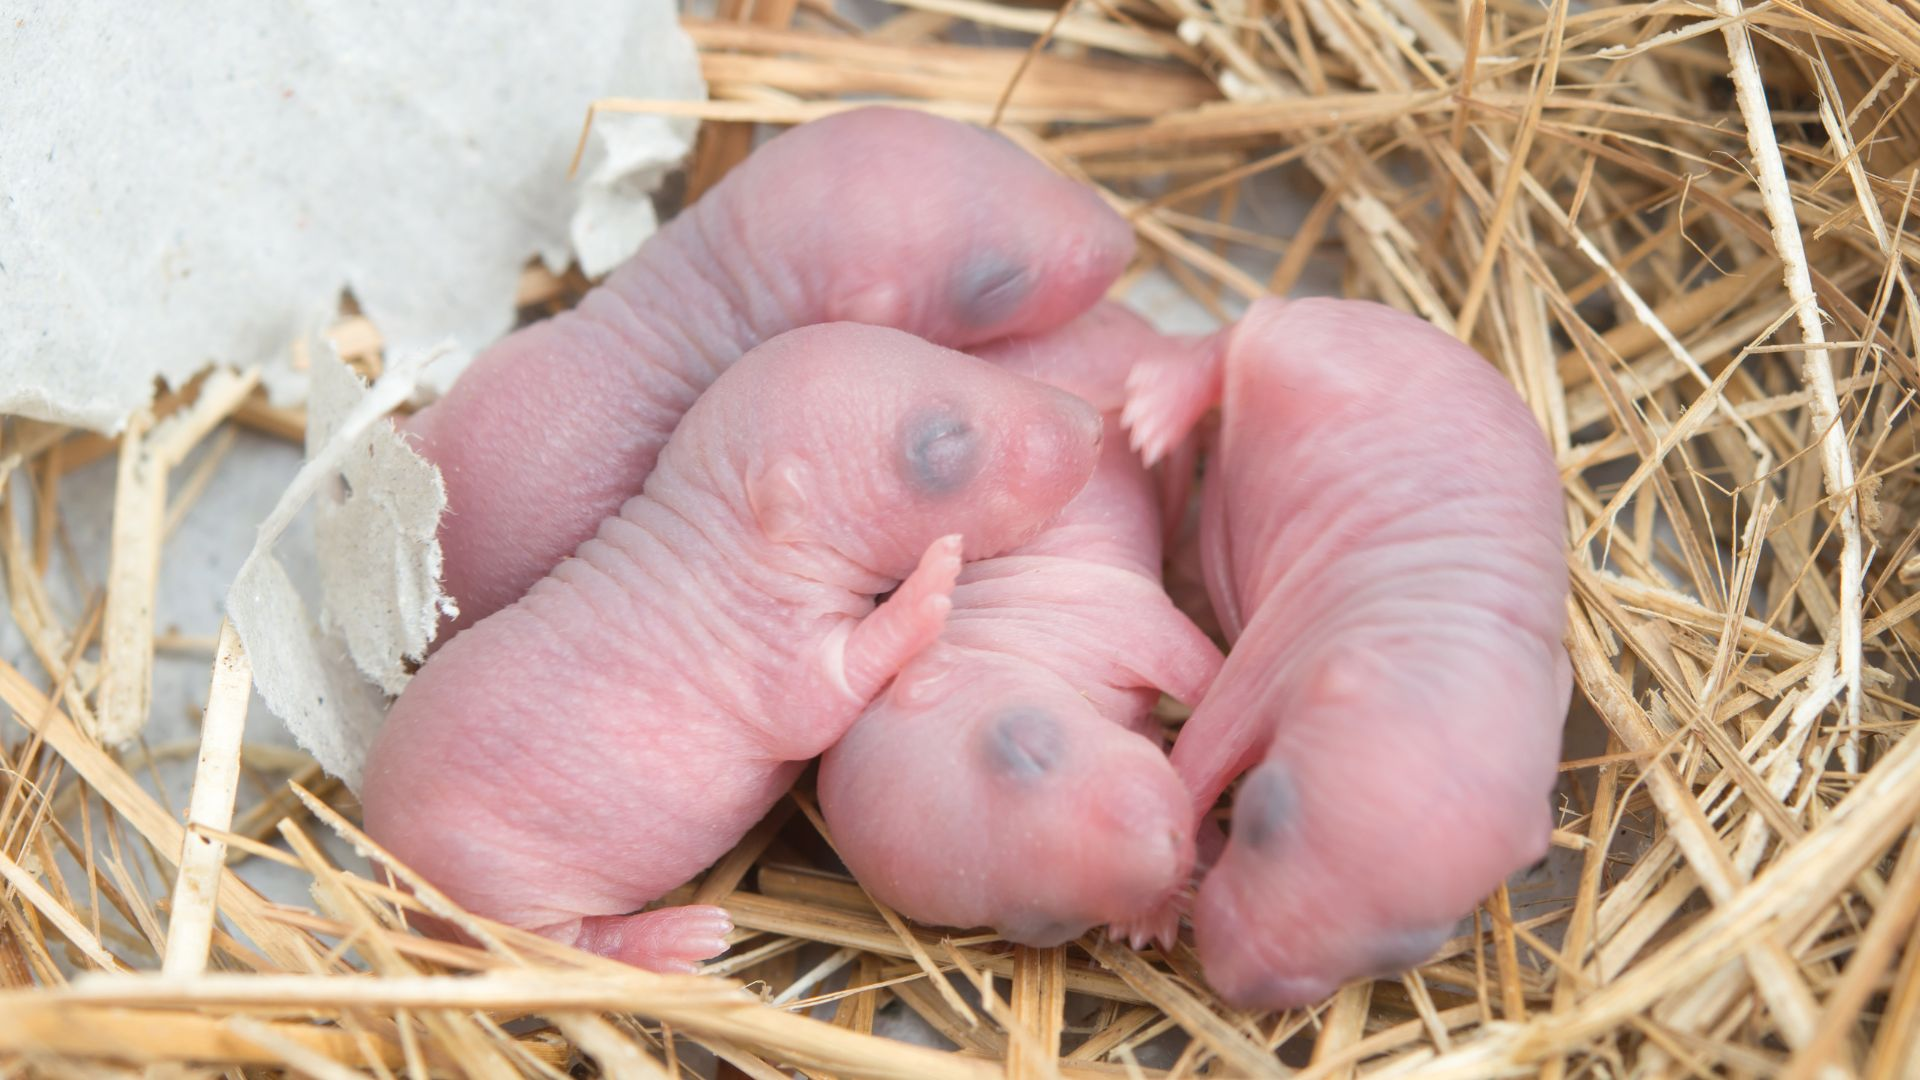 An image of newborn mice in their nest.